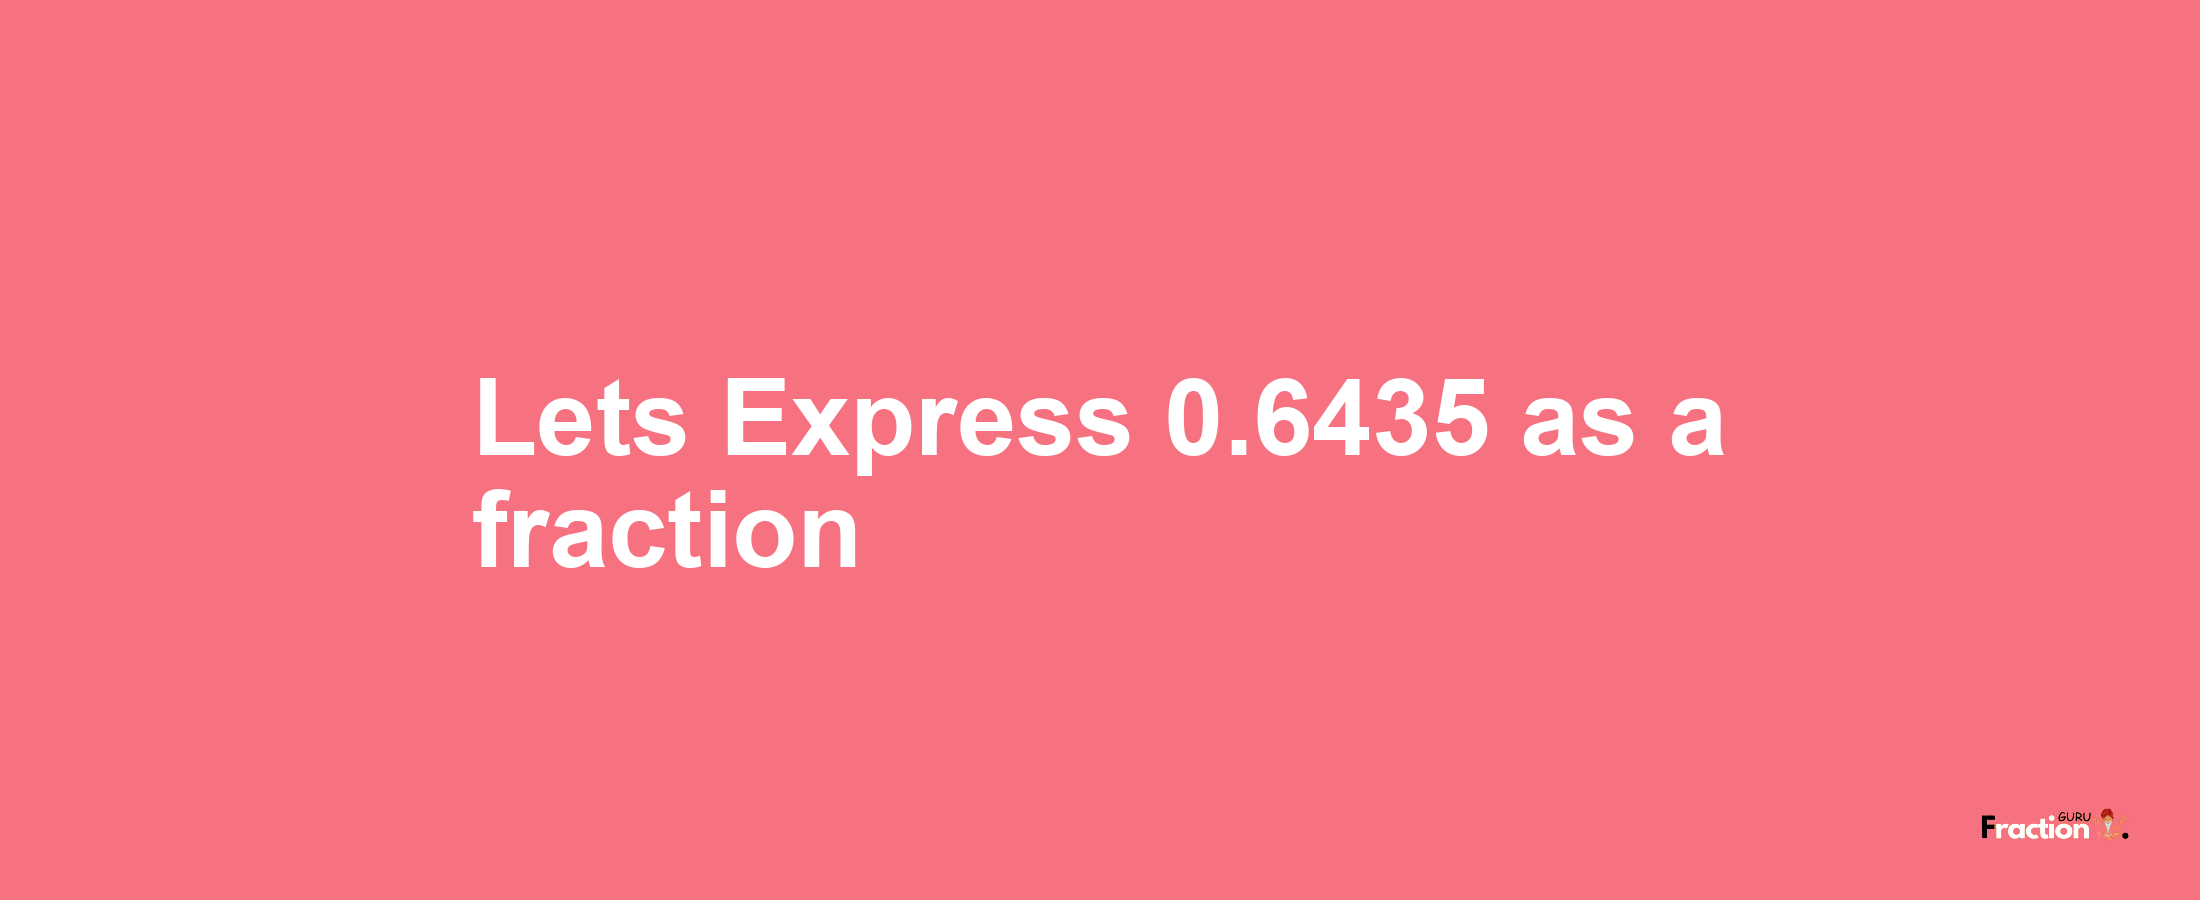 Lets Express 0.6435 as afraction